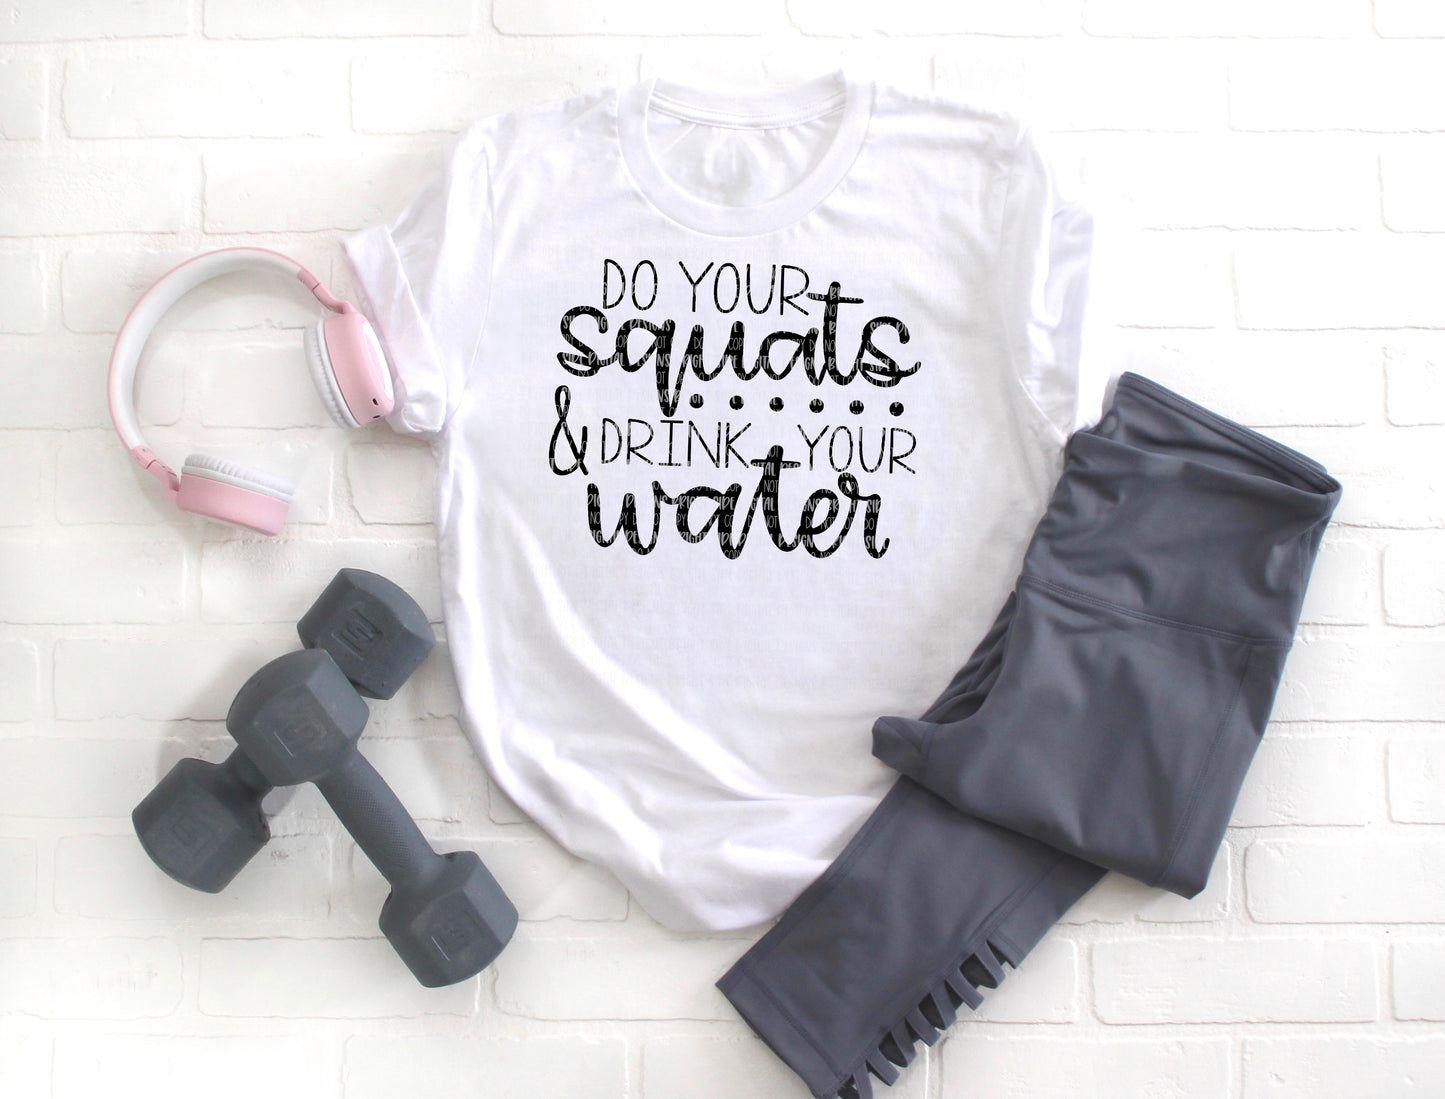 Do your squats & drink your water